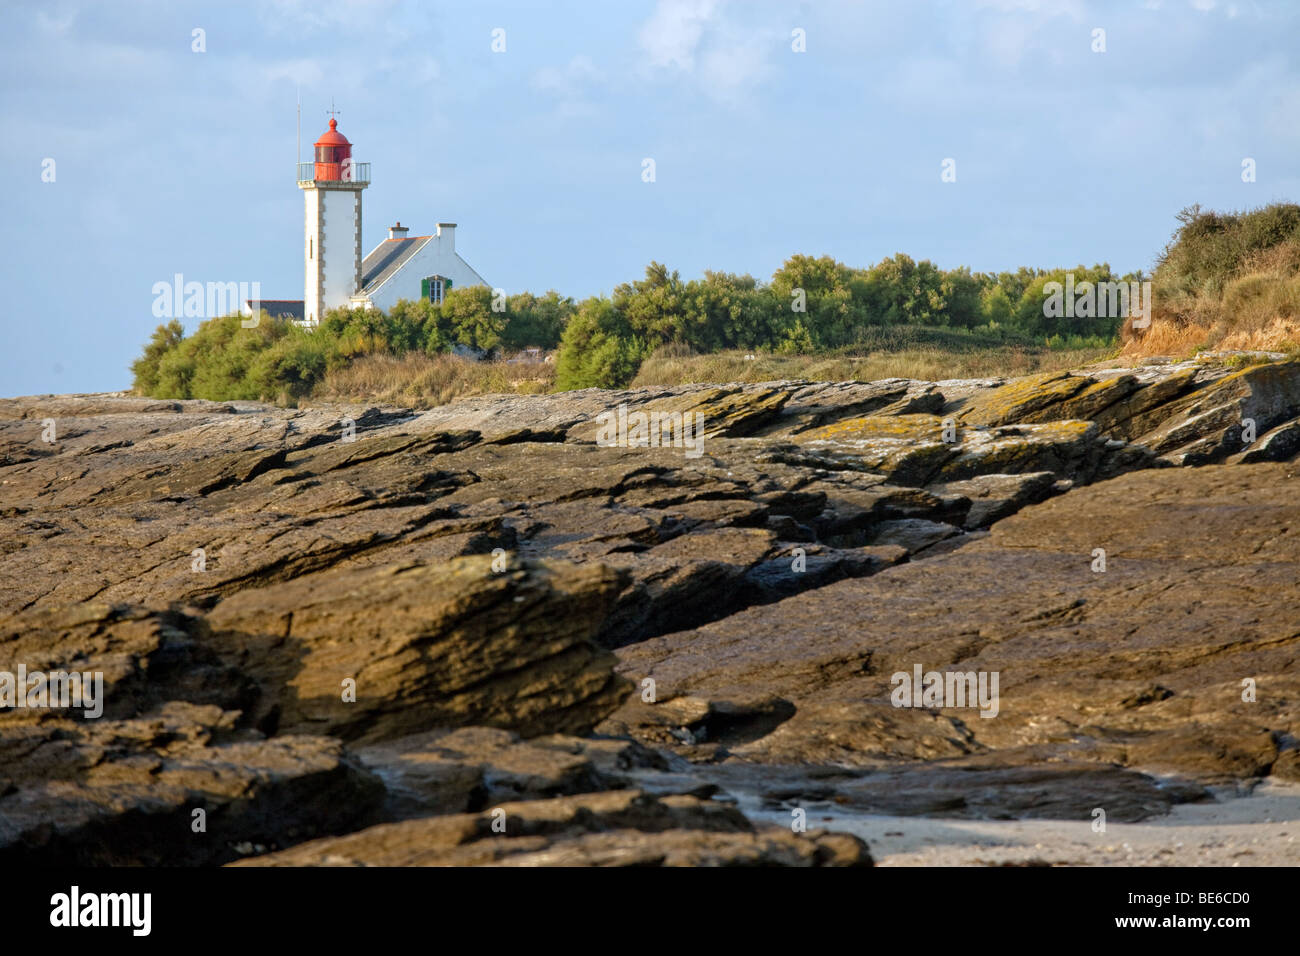 pointe des chats lighthouse at groix island, morbihan,brittany,france Stock Photo